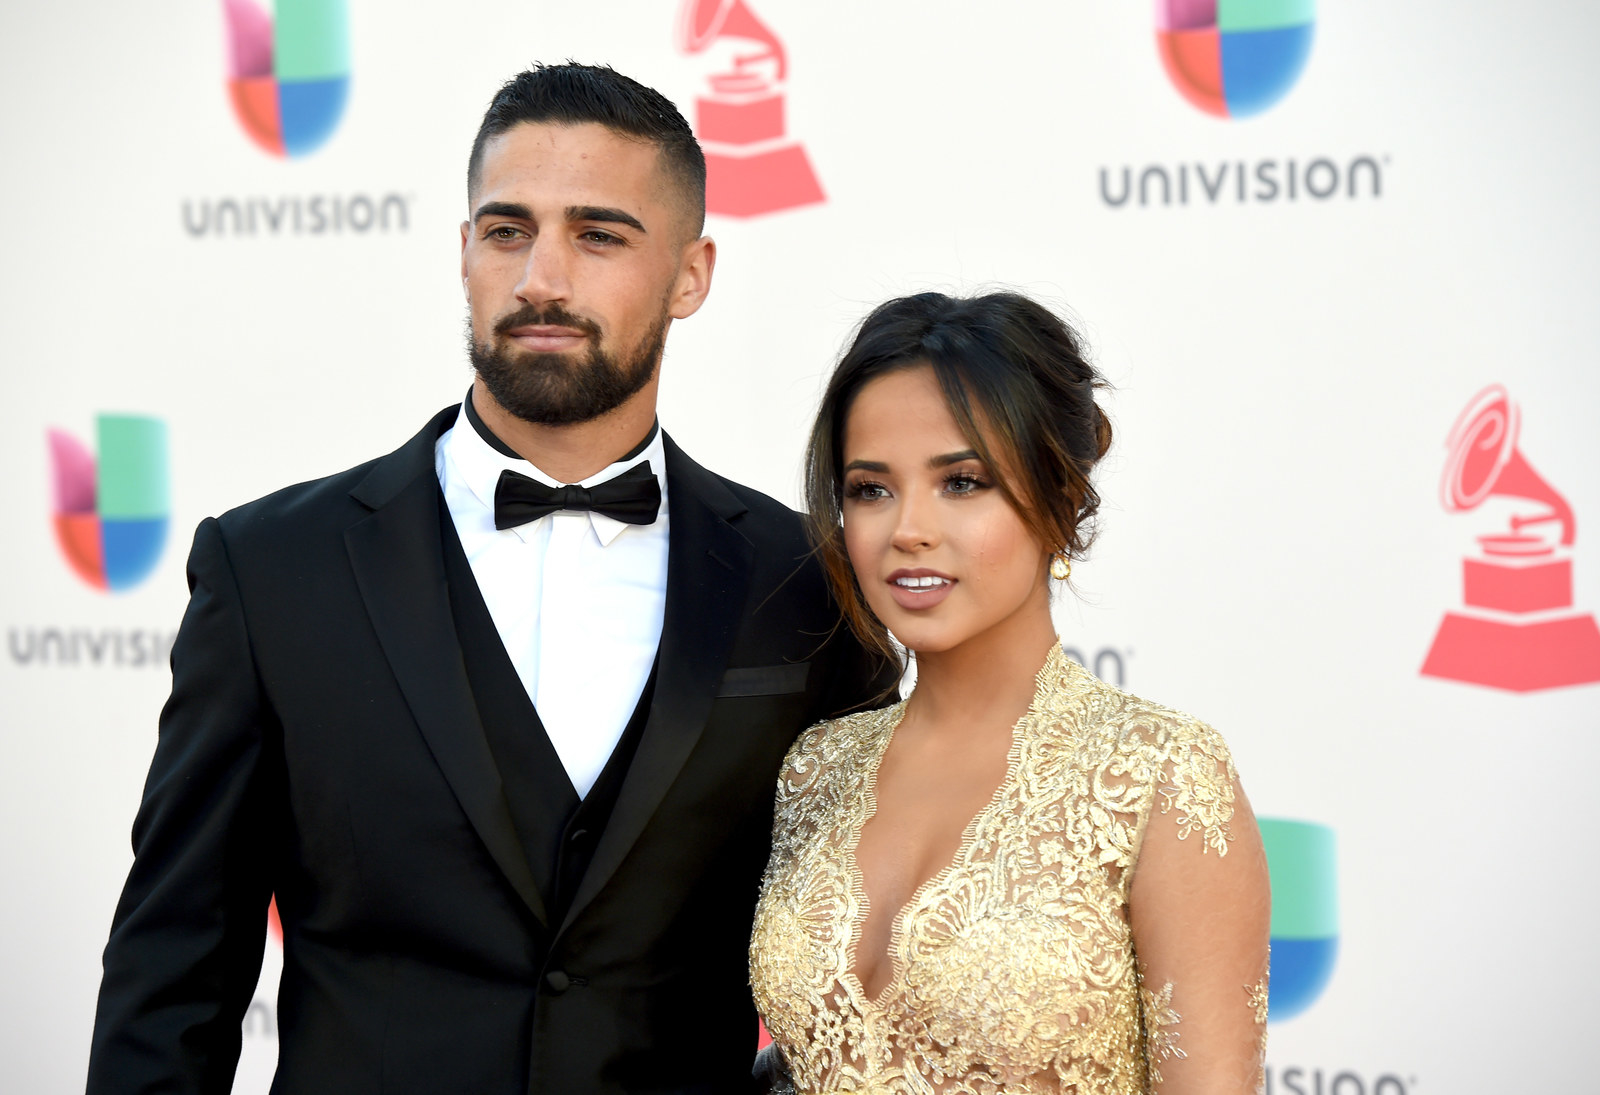 And lastly, No. 1: the pic of him and Becky G - because they are literally ...